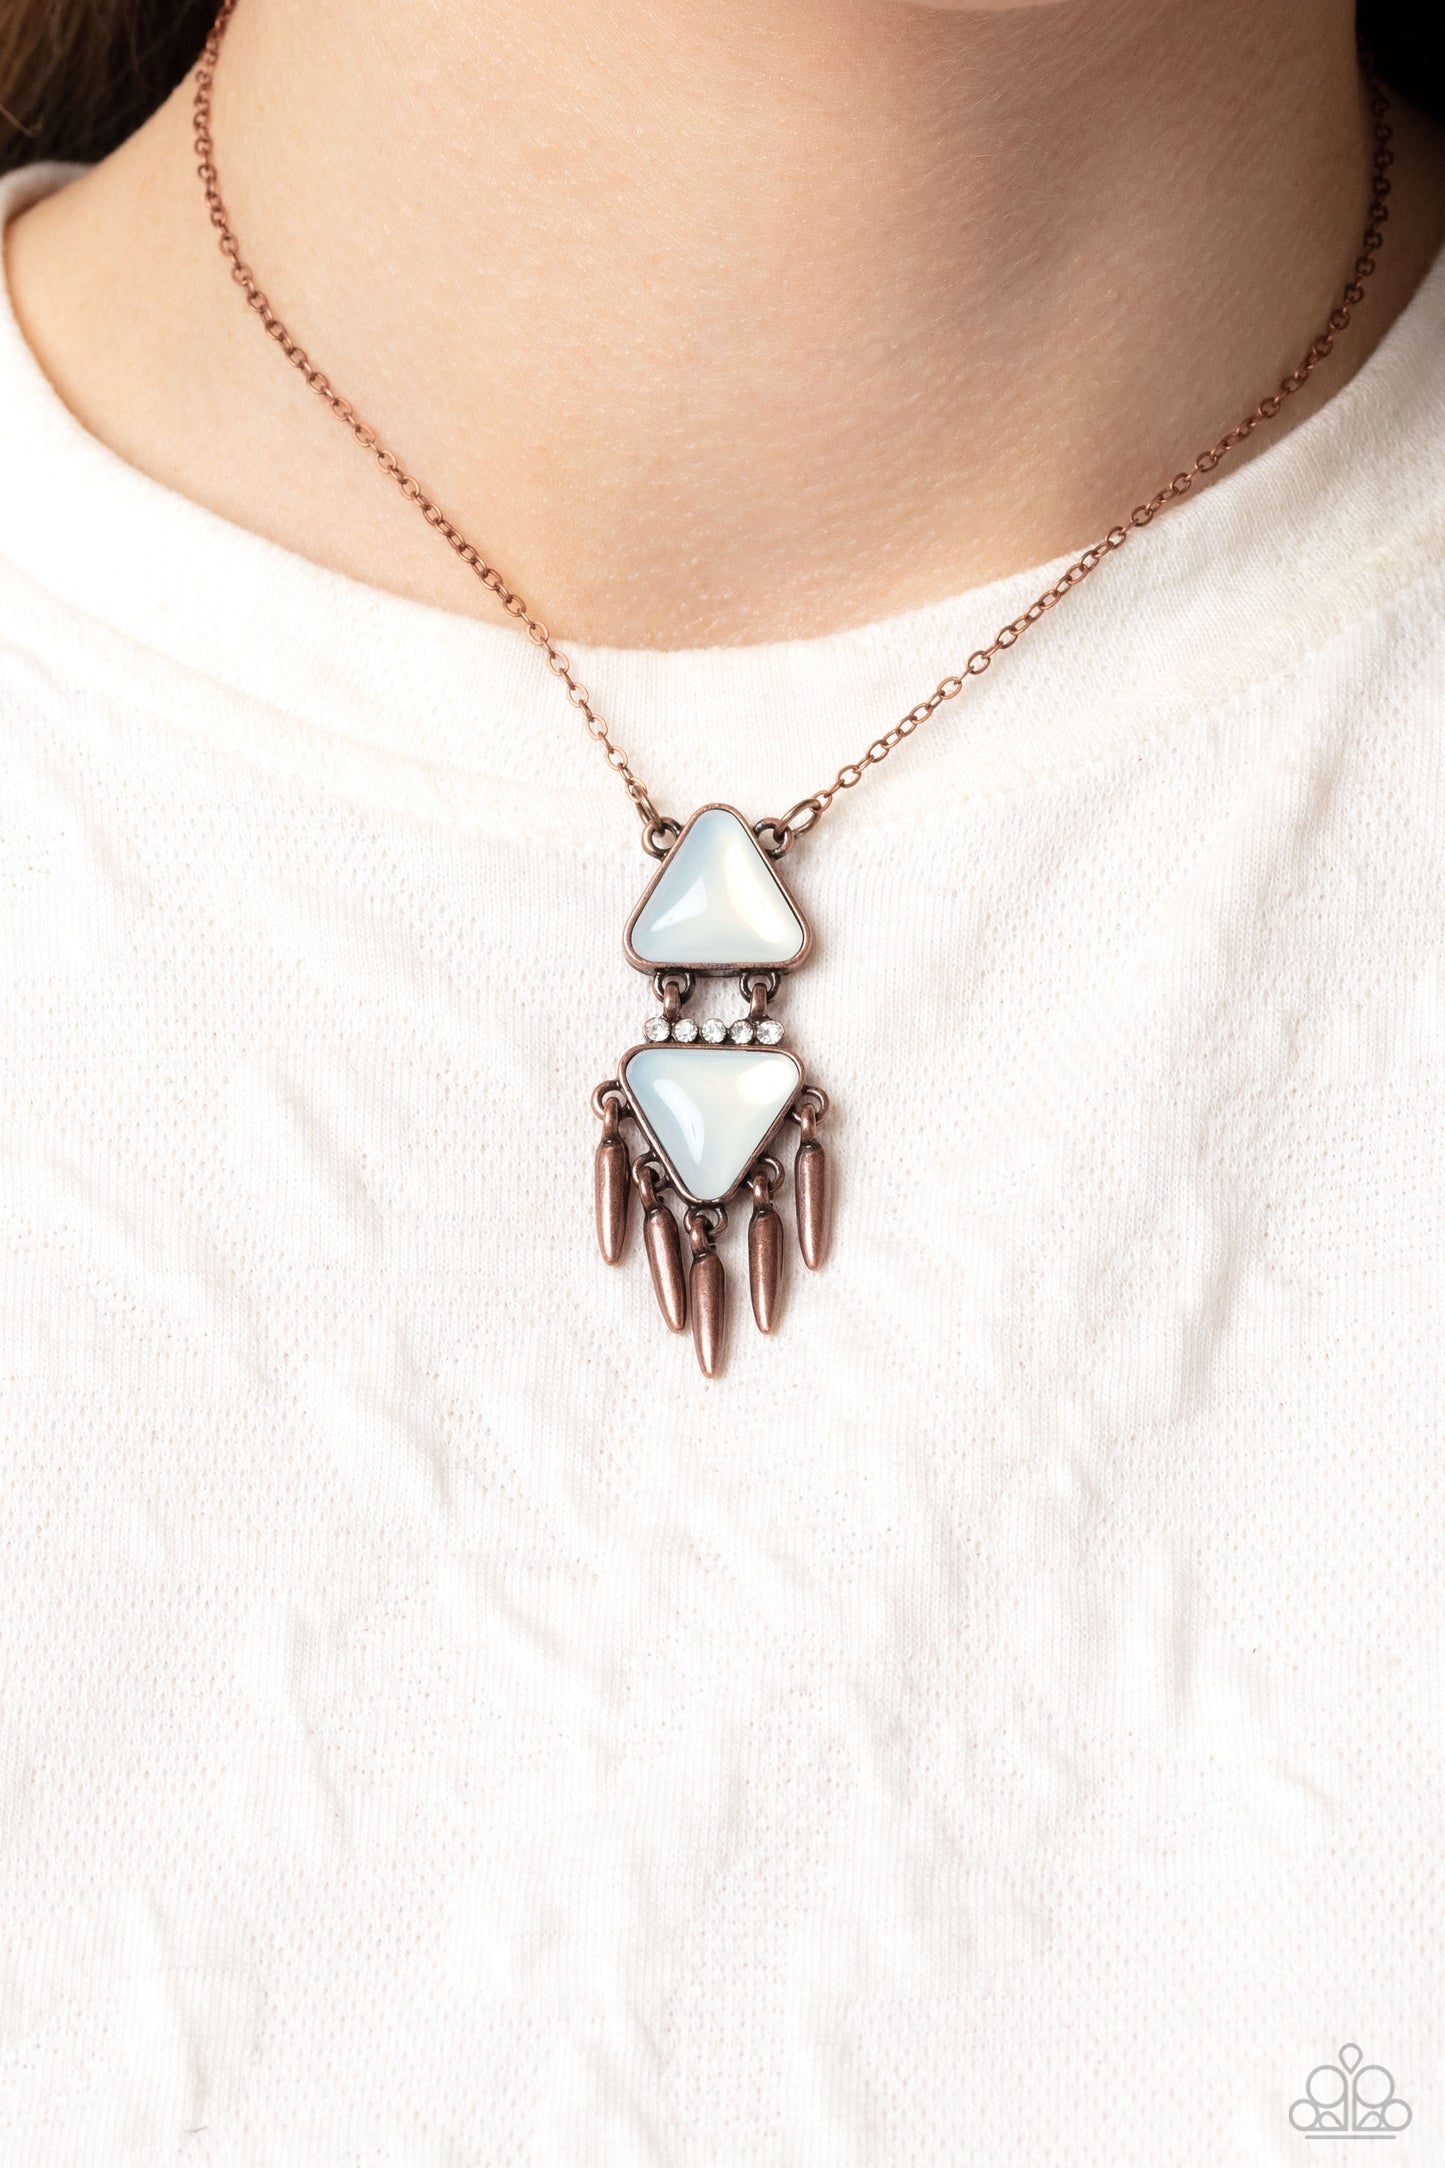 Under the FRINGE Paparazzi Accessories Necklace with Earrings Copper